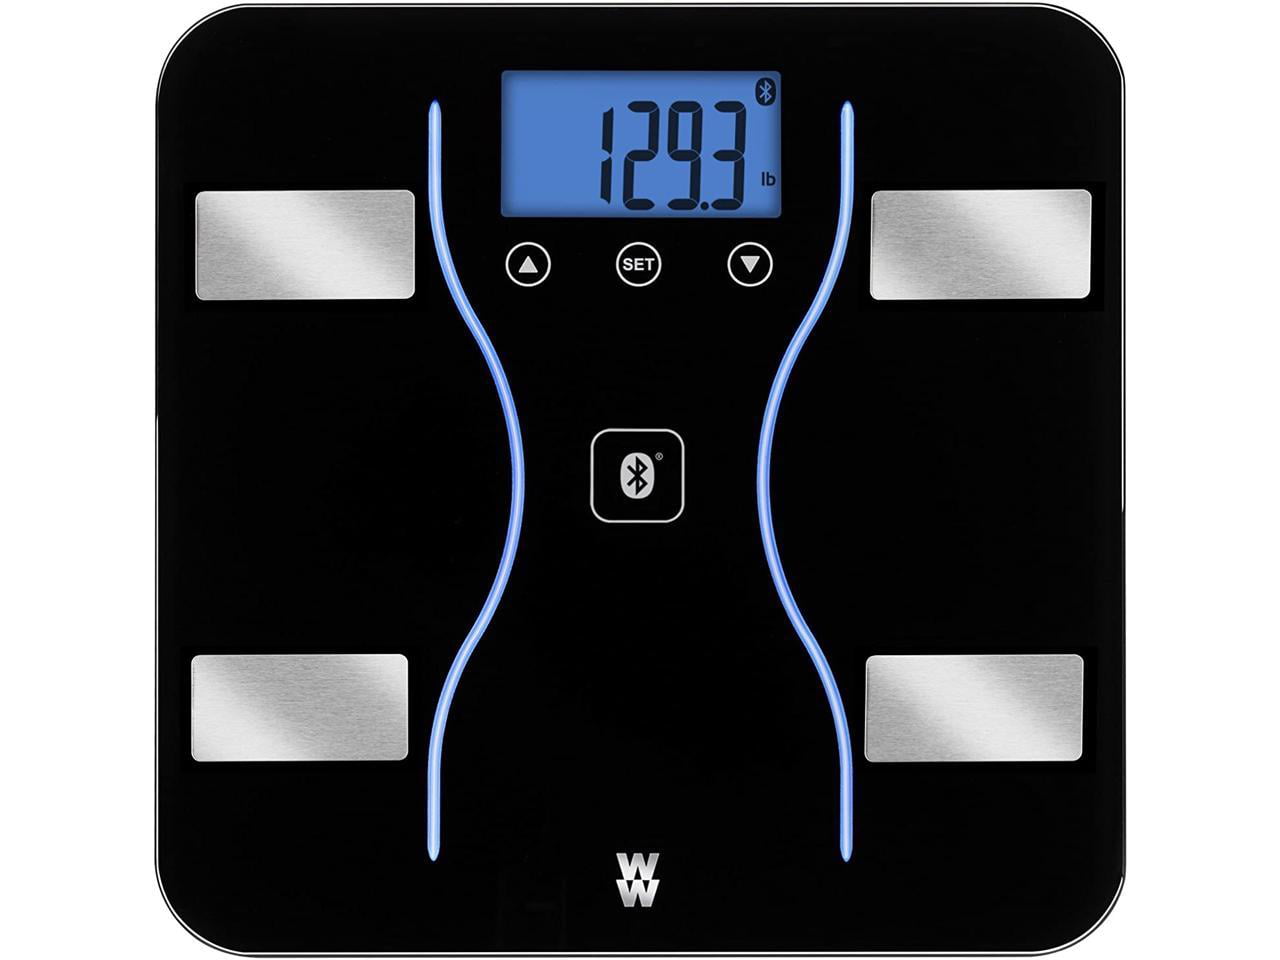 Weight Watchers WW Bluetooth Body Weight Scale by CONAIR